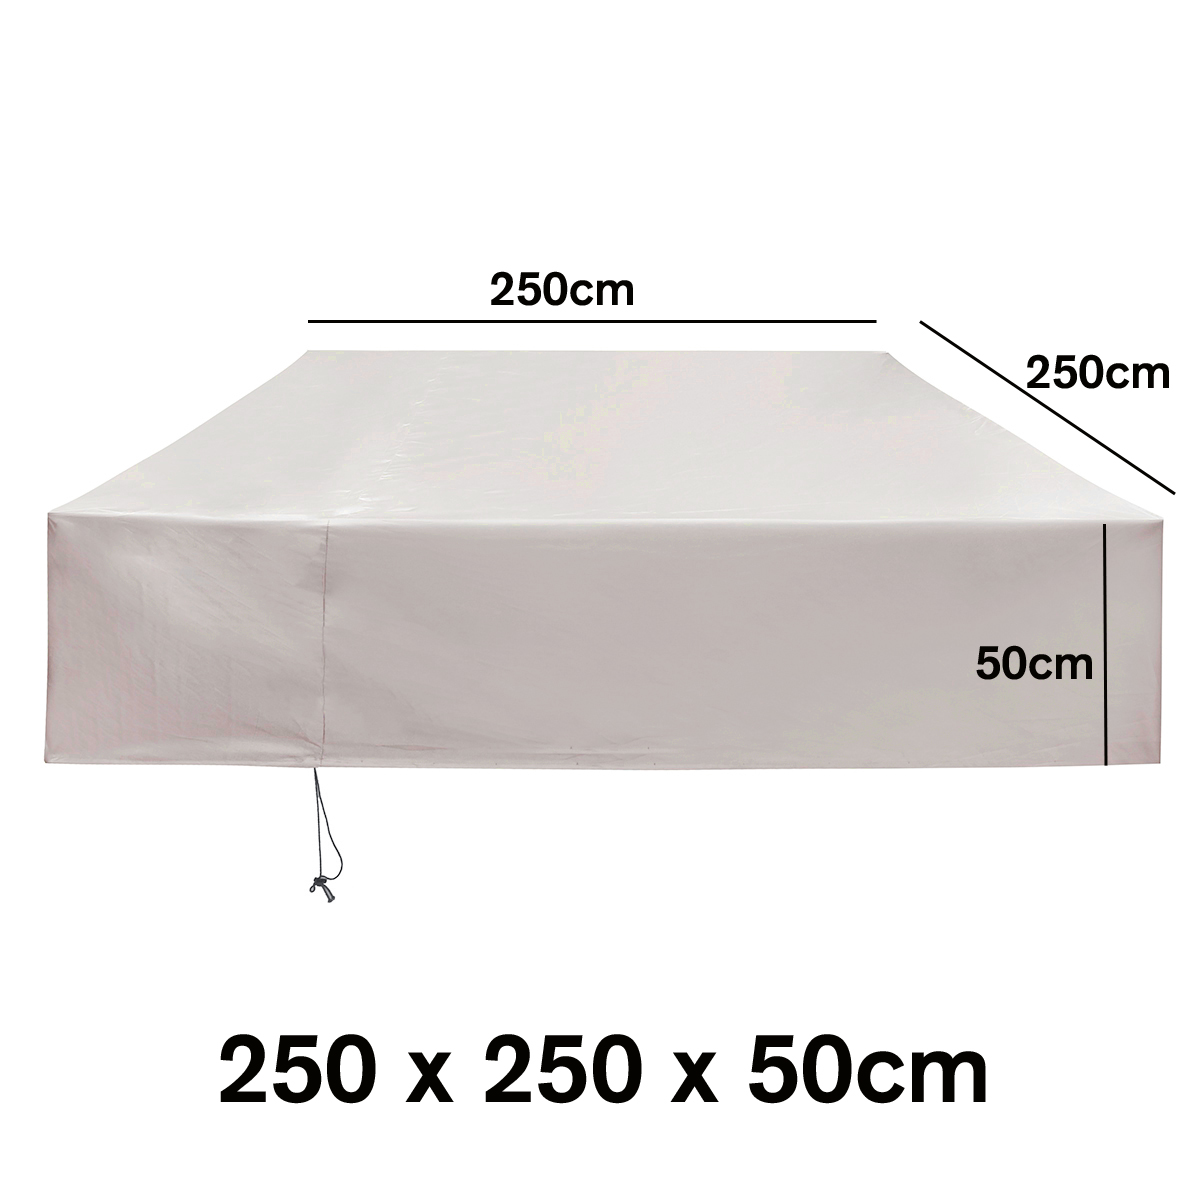 250240220CM-Outdoors-Spa-Hot-Tub-Cover-Waterproof-Furniture-Garden-Protector-1636533-9